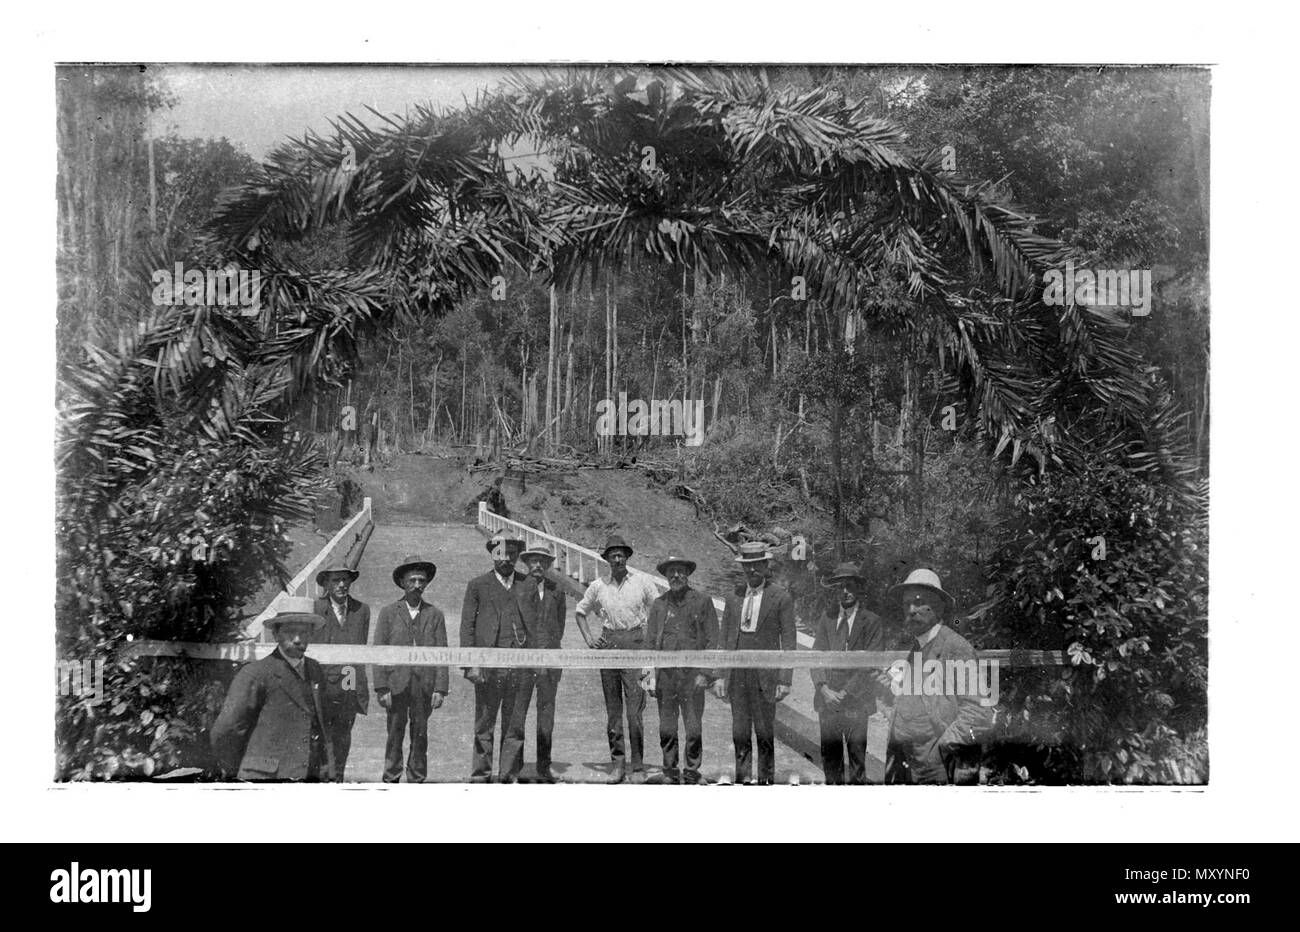 Opening of Danbulla Bridge, Kairi, 12 November 1914. Cairns Post 21 May 1914  Kairi Progress Association 42887140 )   The monthly meeting of the Kairi District Progress Association was held at the Hotel Kairi on Tuesday, 12th May, at 8 p.m.  After formal business was transacted, the following correspondence was dealt with.  From Public Estate Improvement Office, through Mr. Gillies, M.L.A., to the effect that the construction of Danbulla Bridge, etc., would probably begin in May. Stock Photo